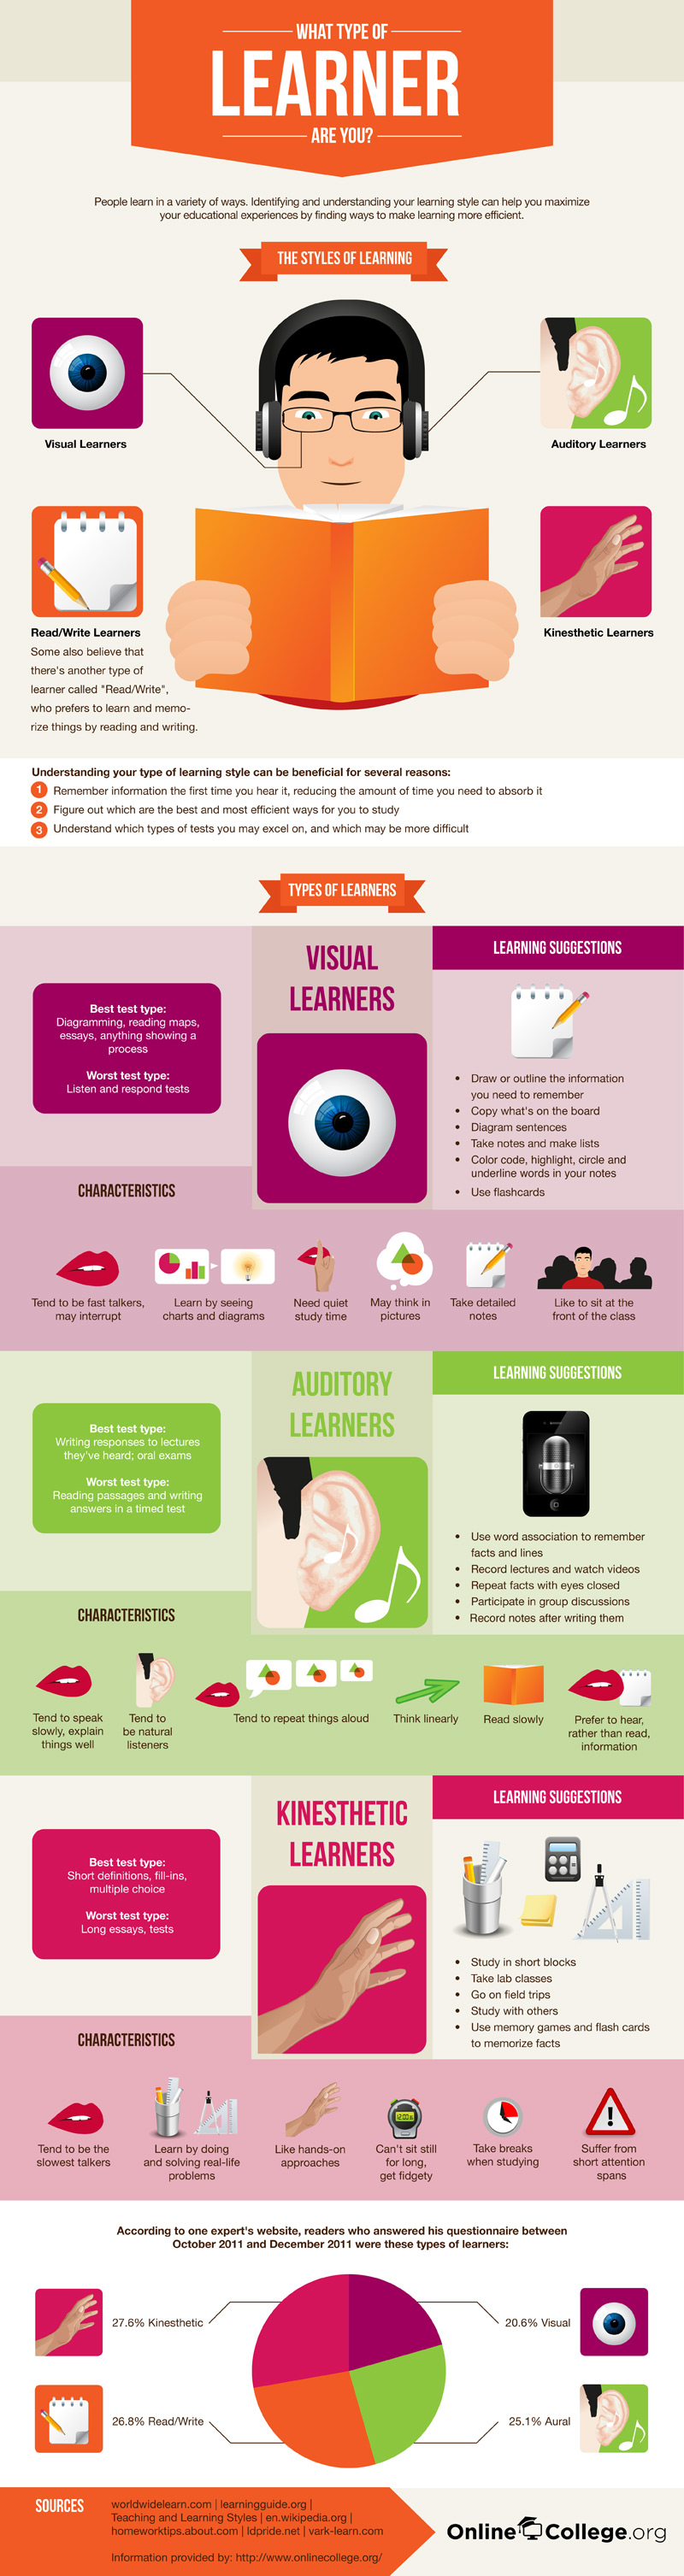 What type of learner are you?